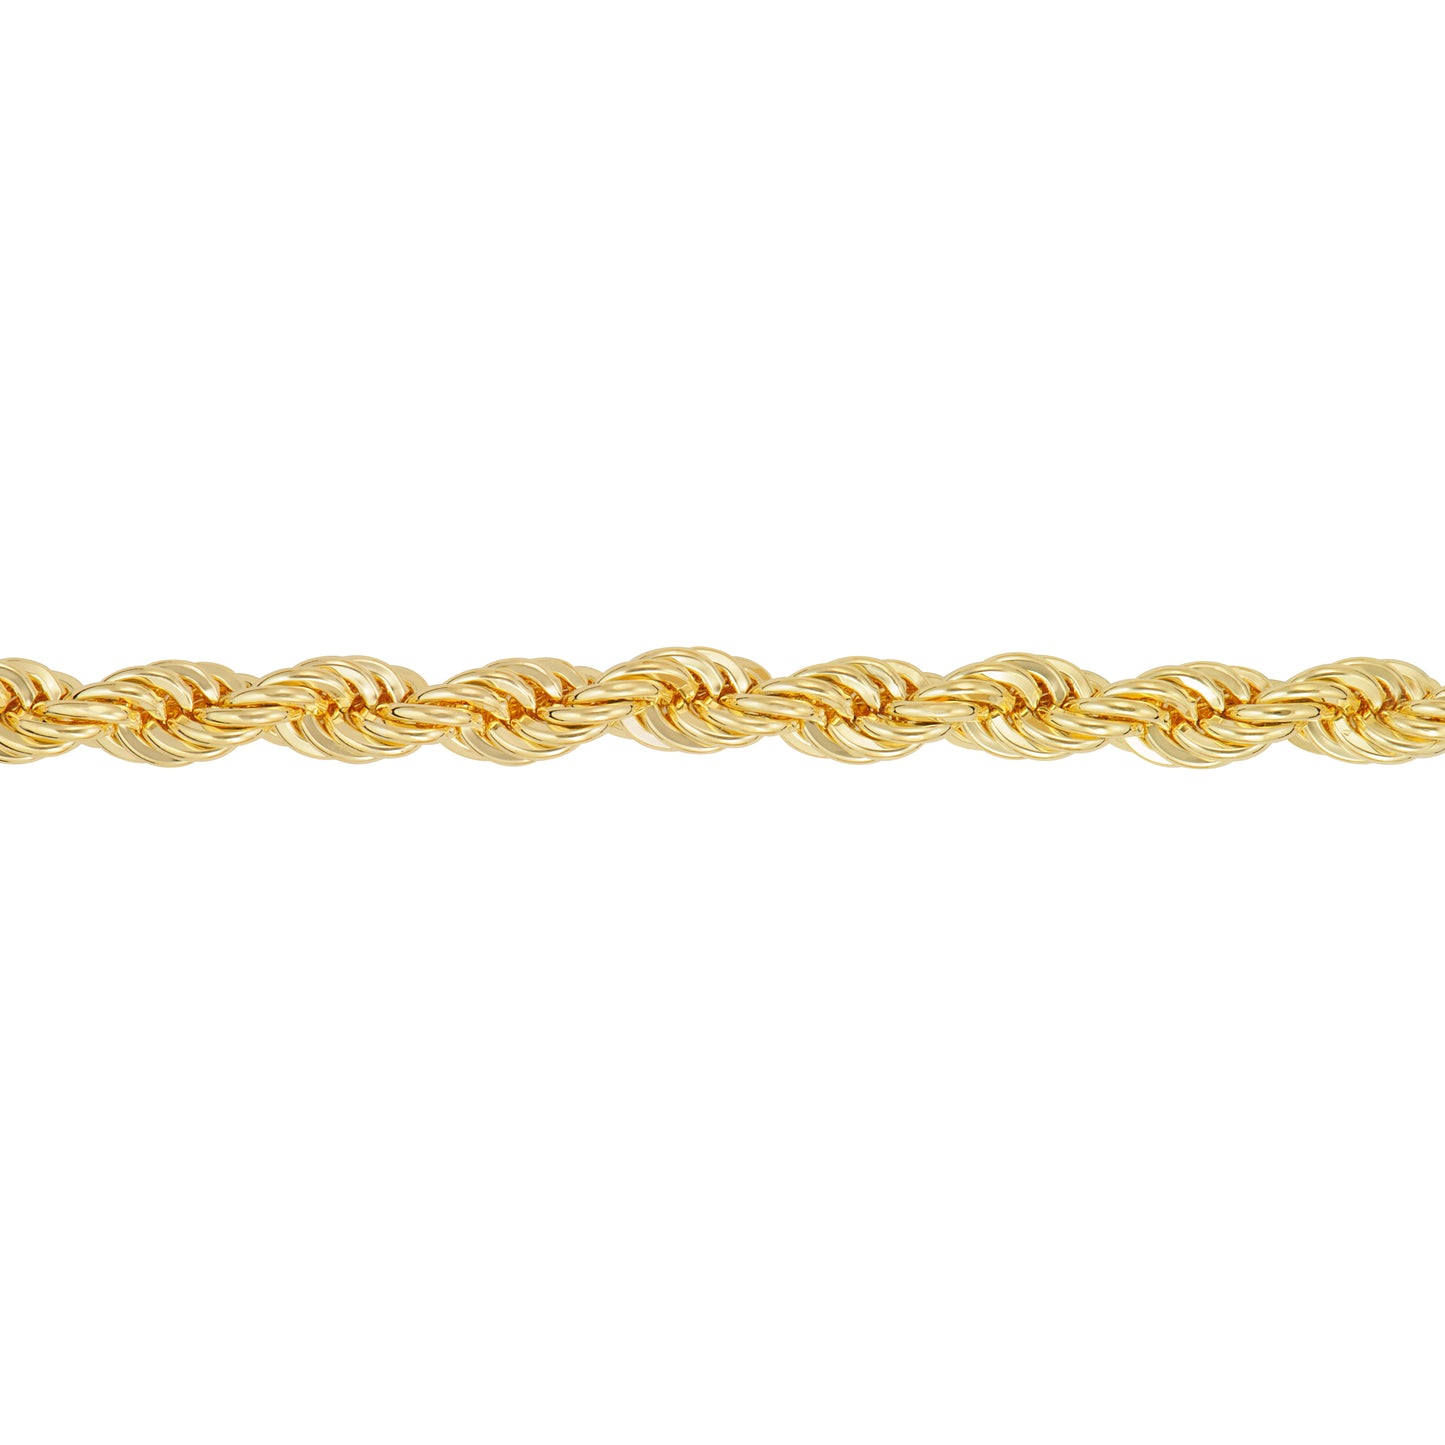 7.5" Classic Solid Rope Bracelet